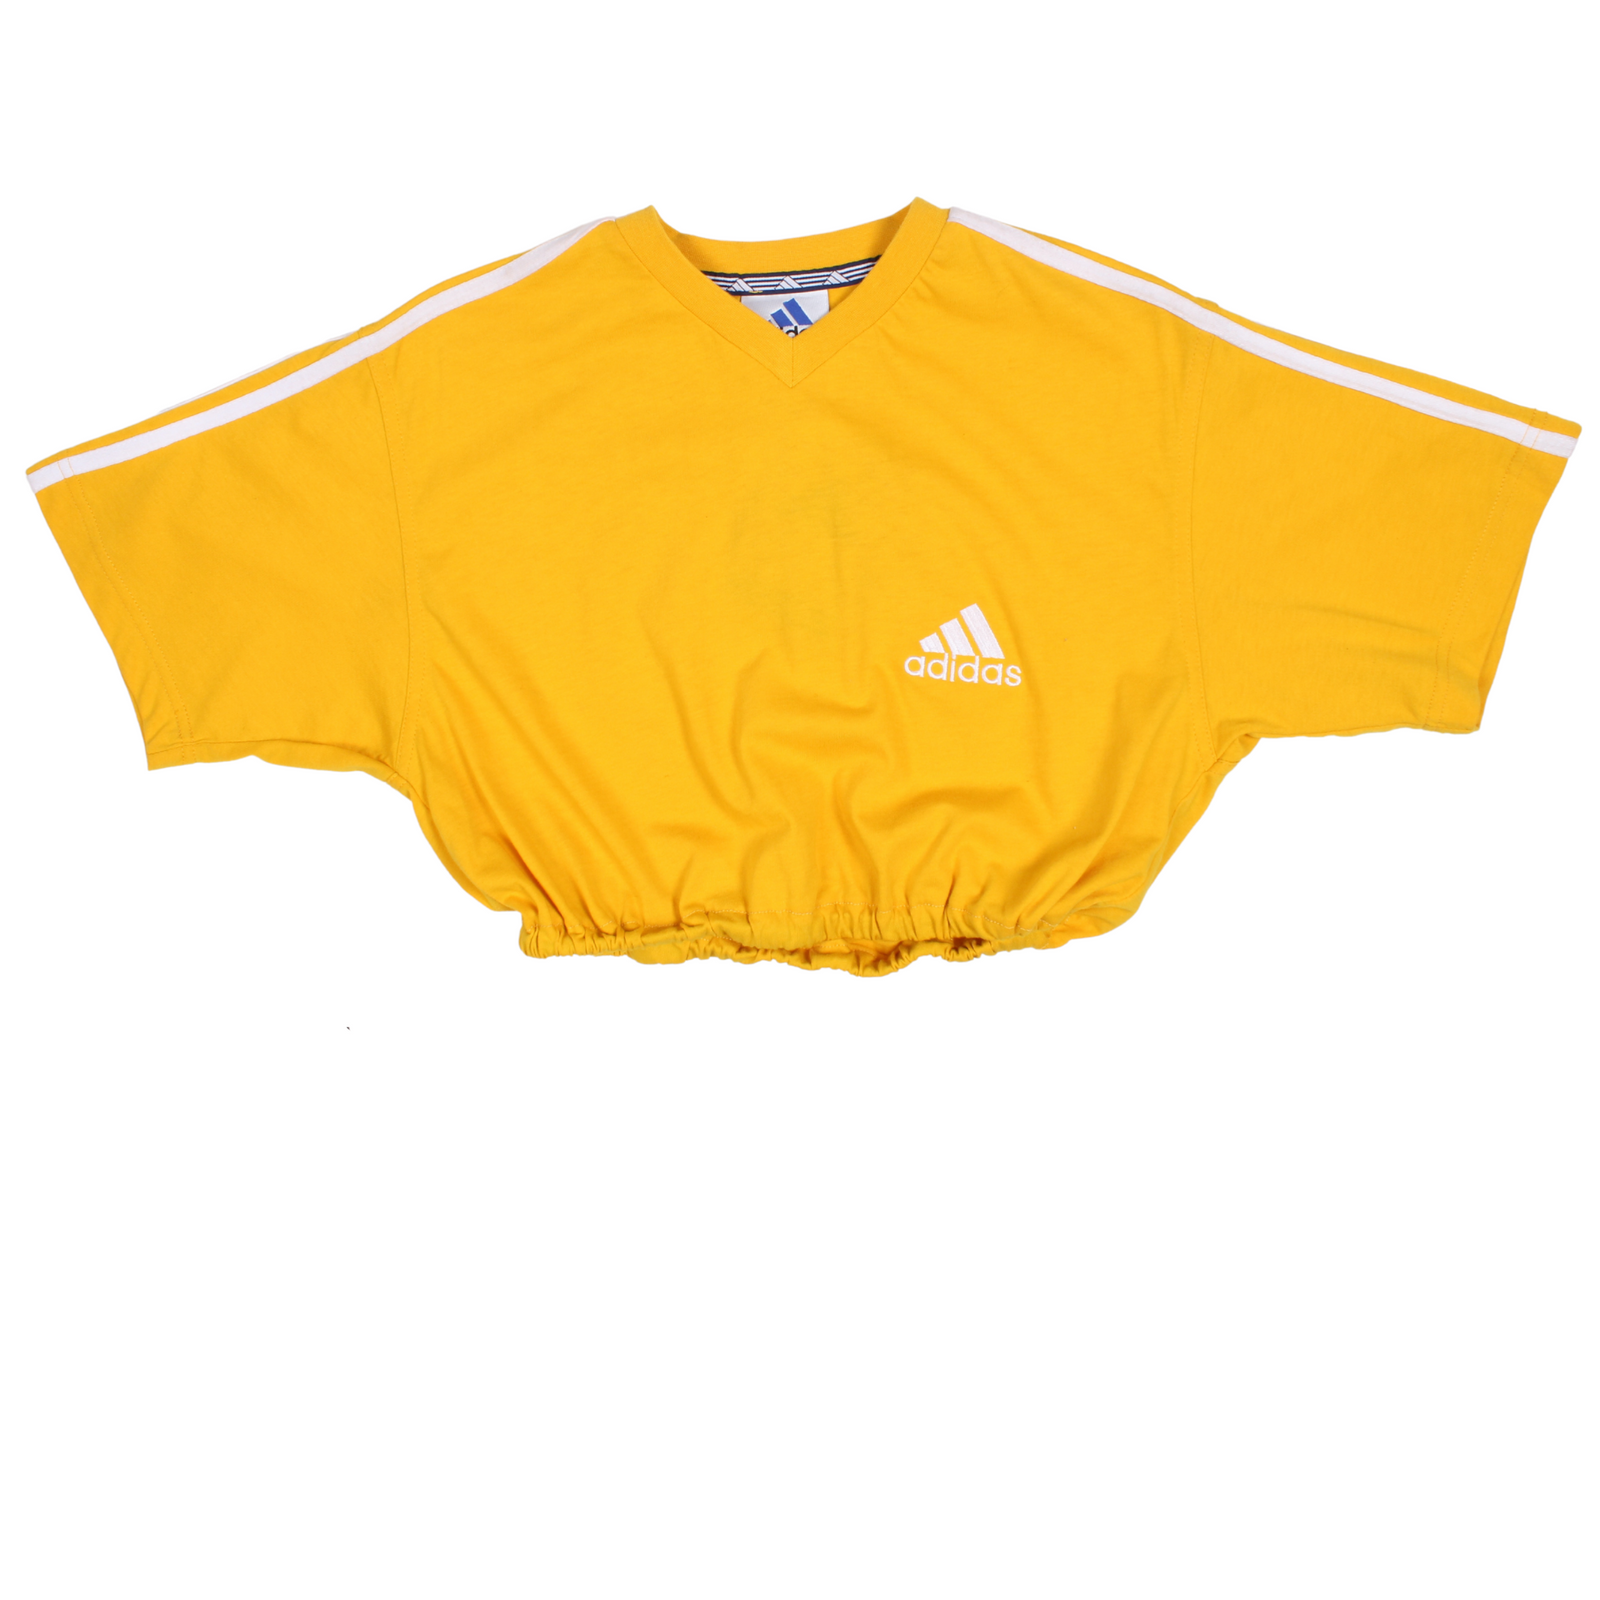 Vintage Adidas Reworked Cropped T Shirt (S) BNWT